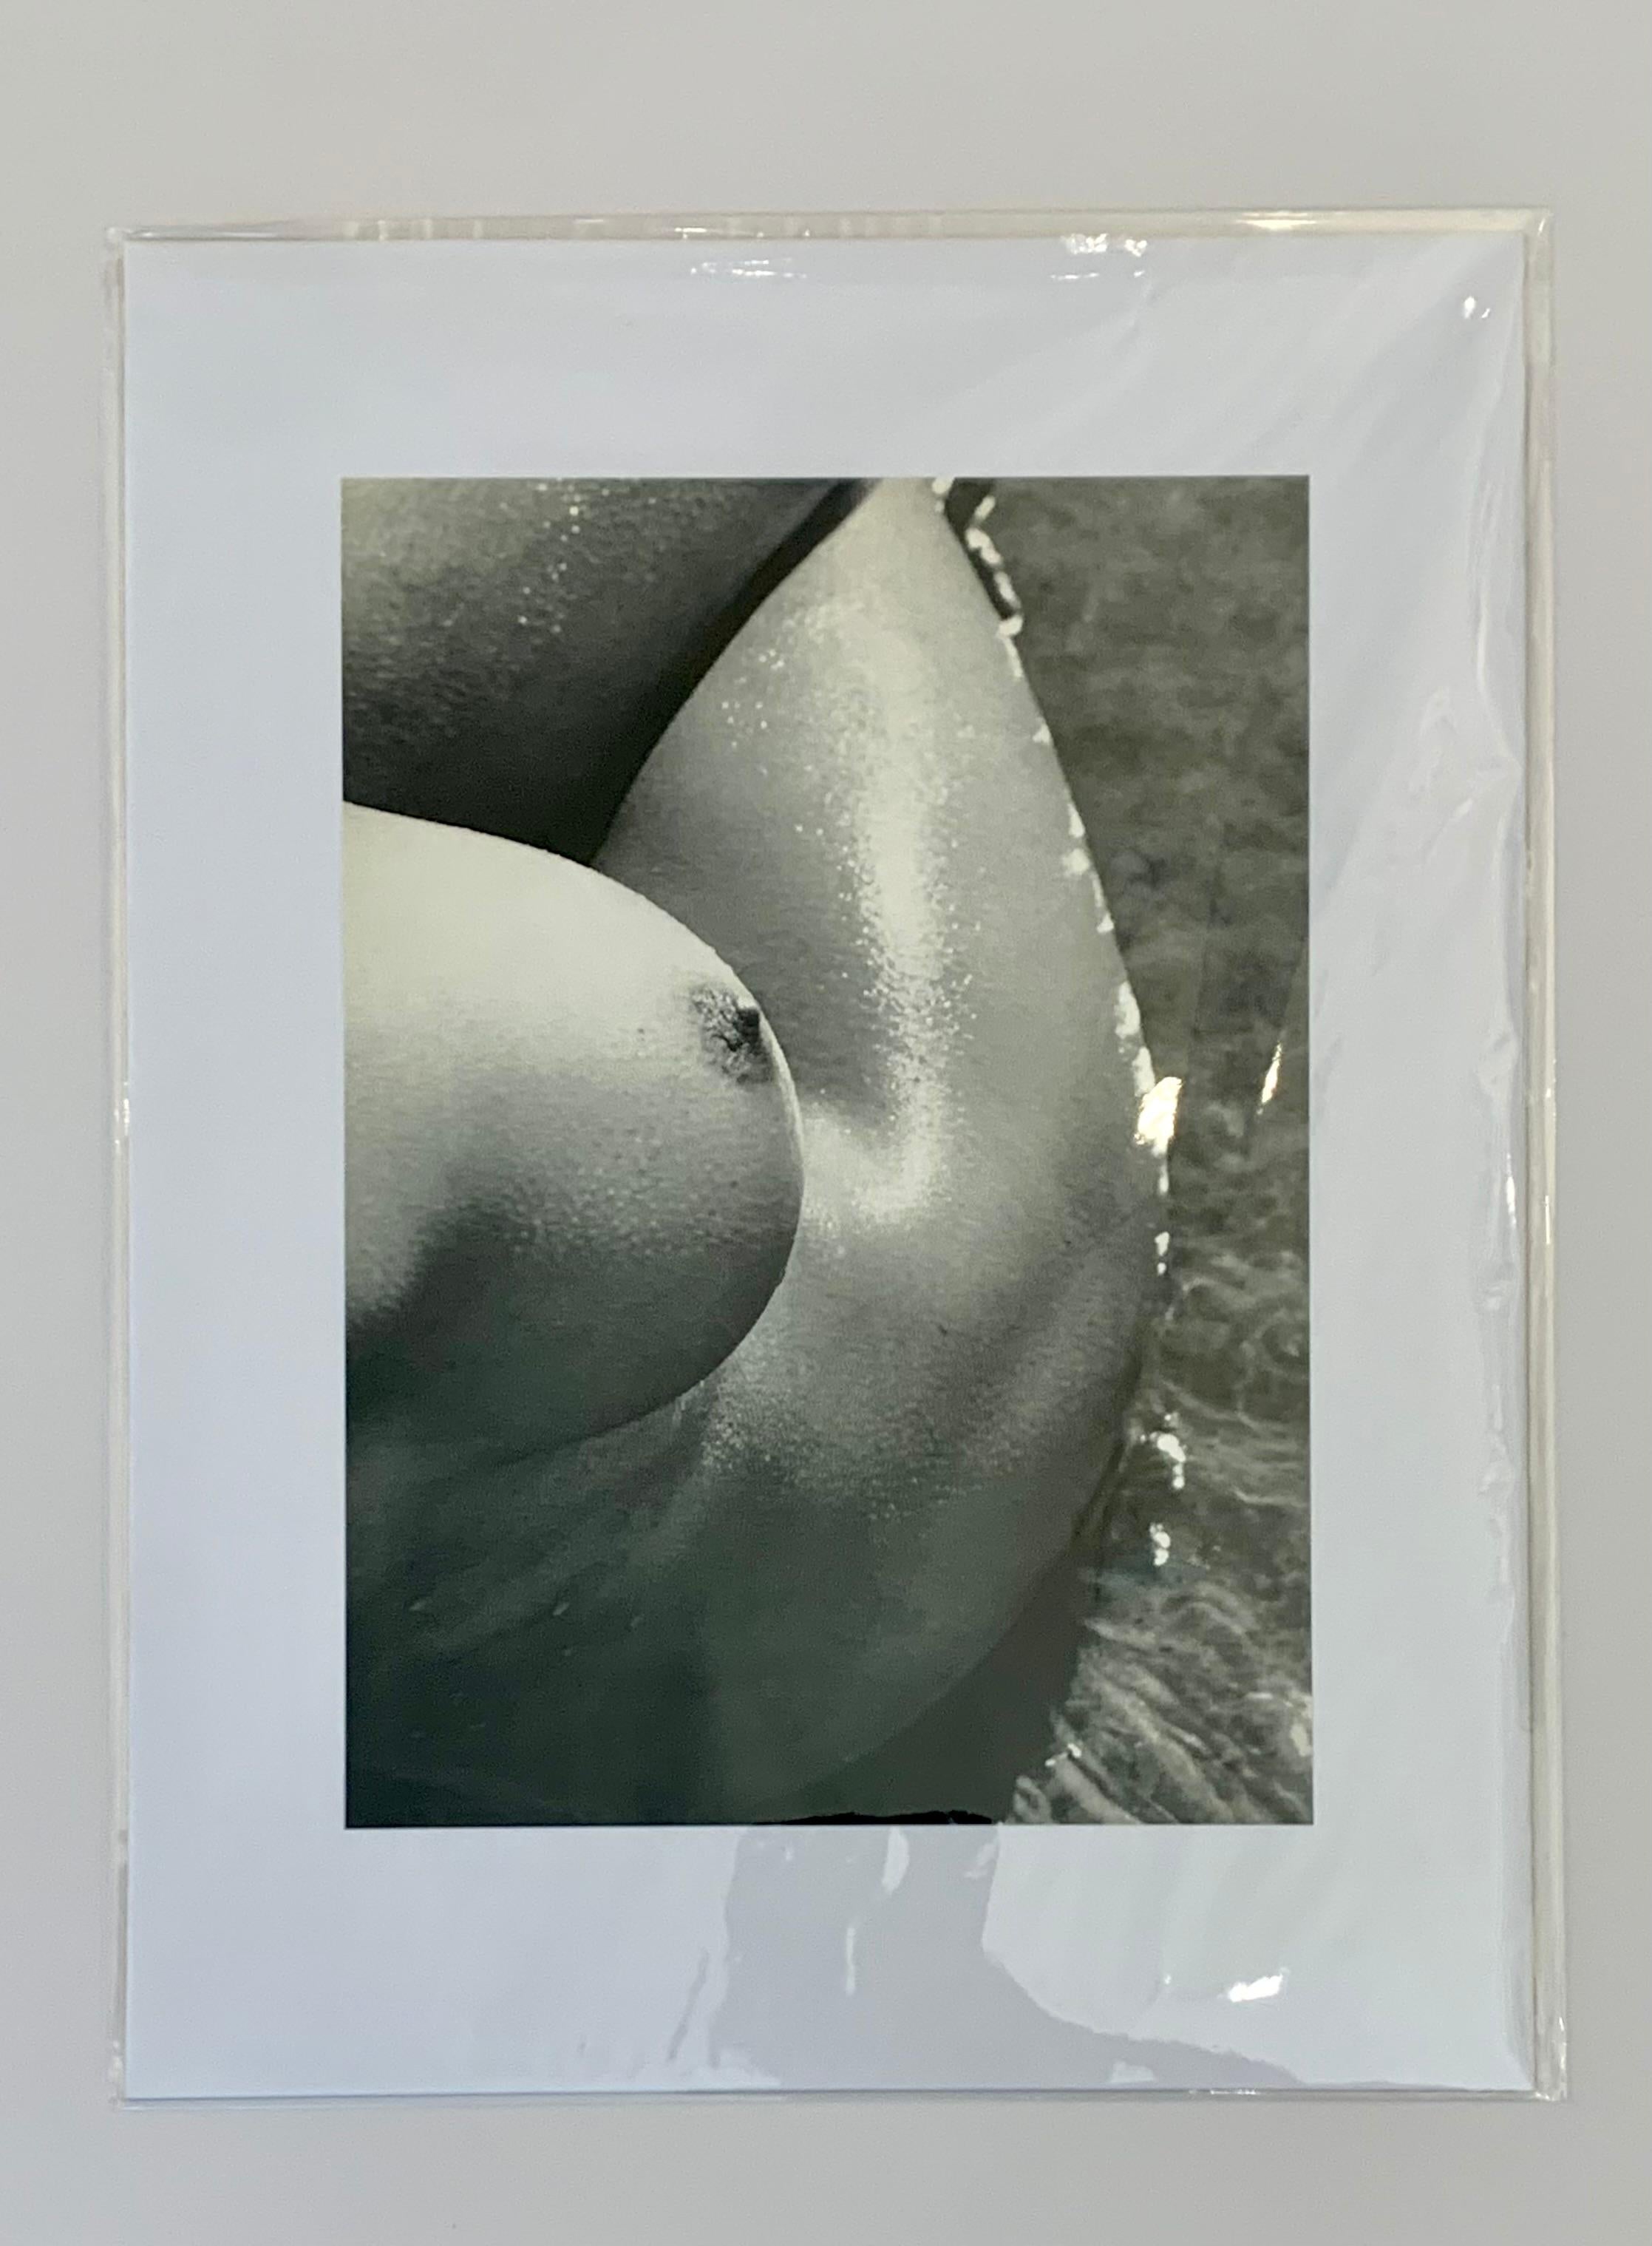 Nude Female Study 1968
by Lucien Clergue

A curved, sculptured shot of a nude female torso and breast captured by Lucien Clergue 

Unframed
Matted
Overall size : 12 x 16